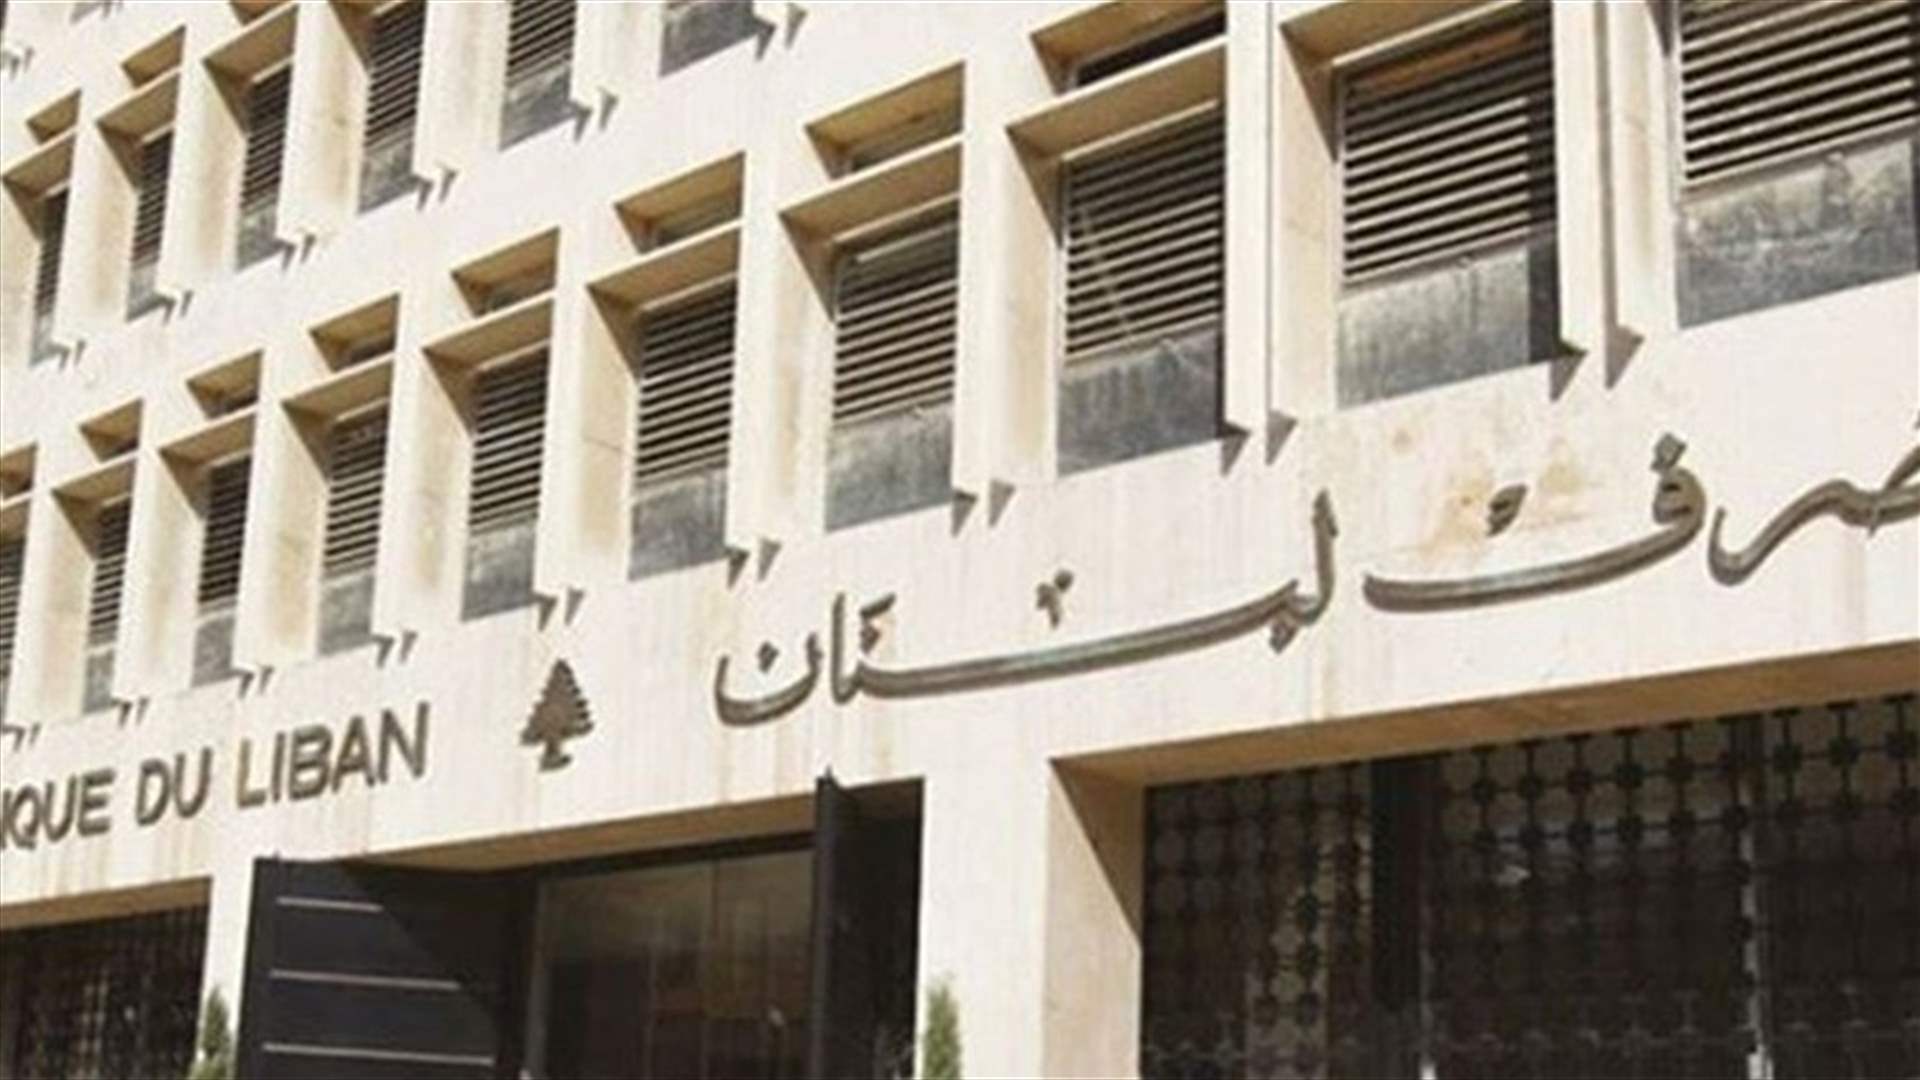 Prioritizing stability: US Department of State calls on Lebanon to implement reforms in Central Bank Governor selection